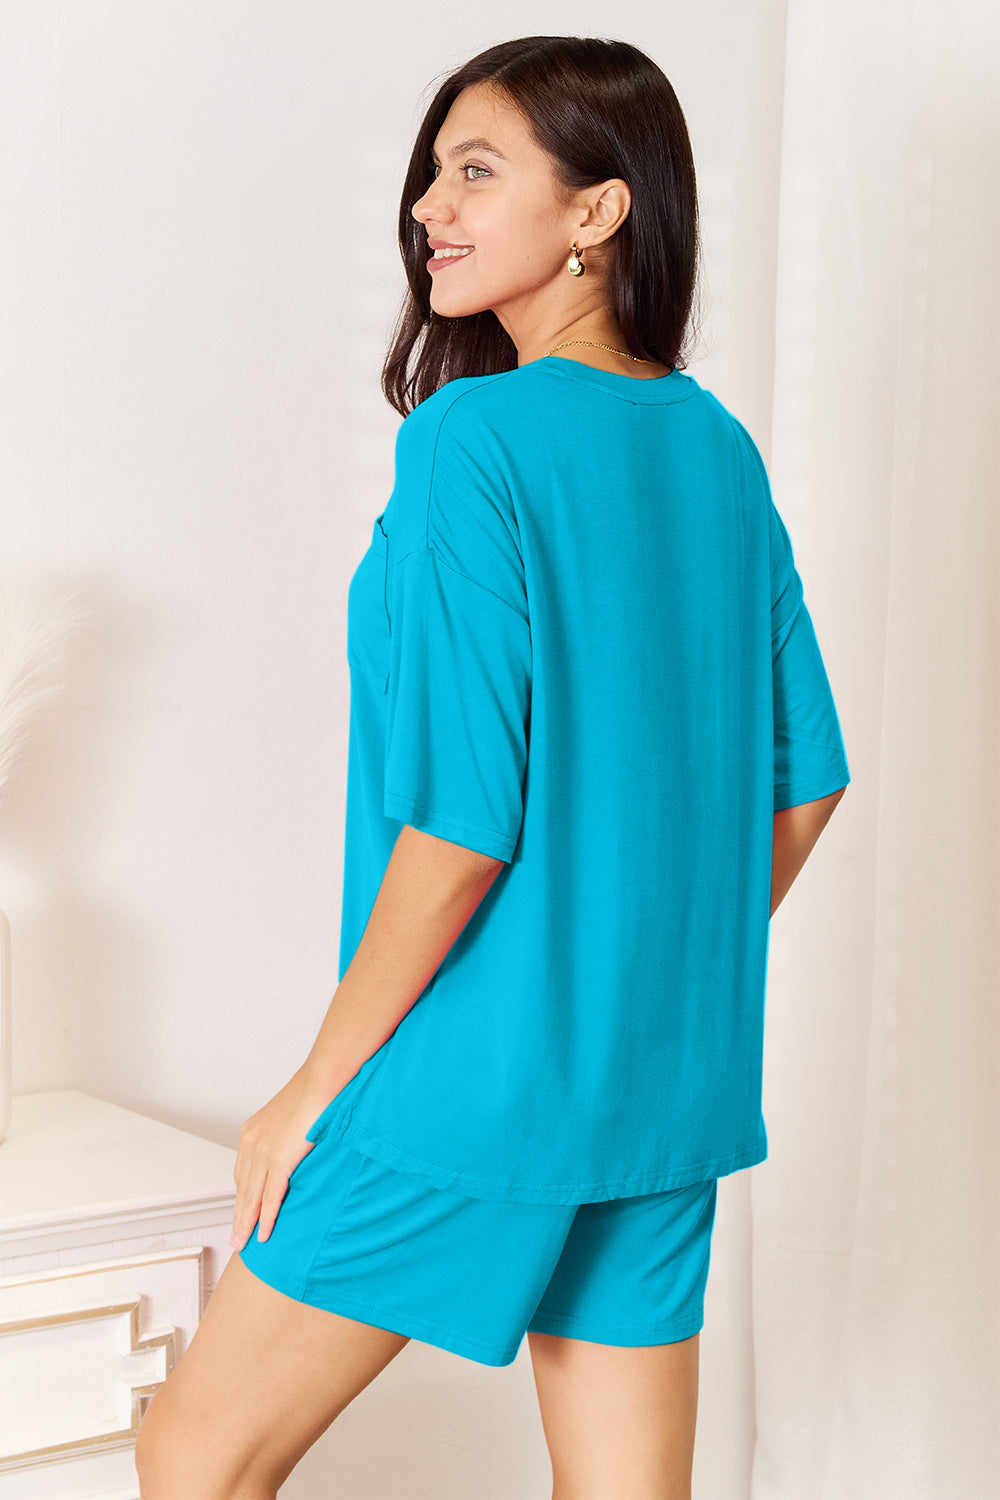 Basic Bae Full Size Soft Rayon Half Sleeve Top and Shorts Set - Comfortable, Stylish, and Perfect for Casual Wear, Lounge, or Sleepwear